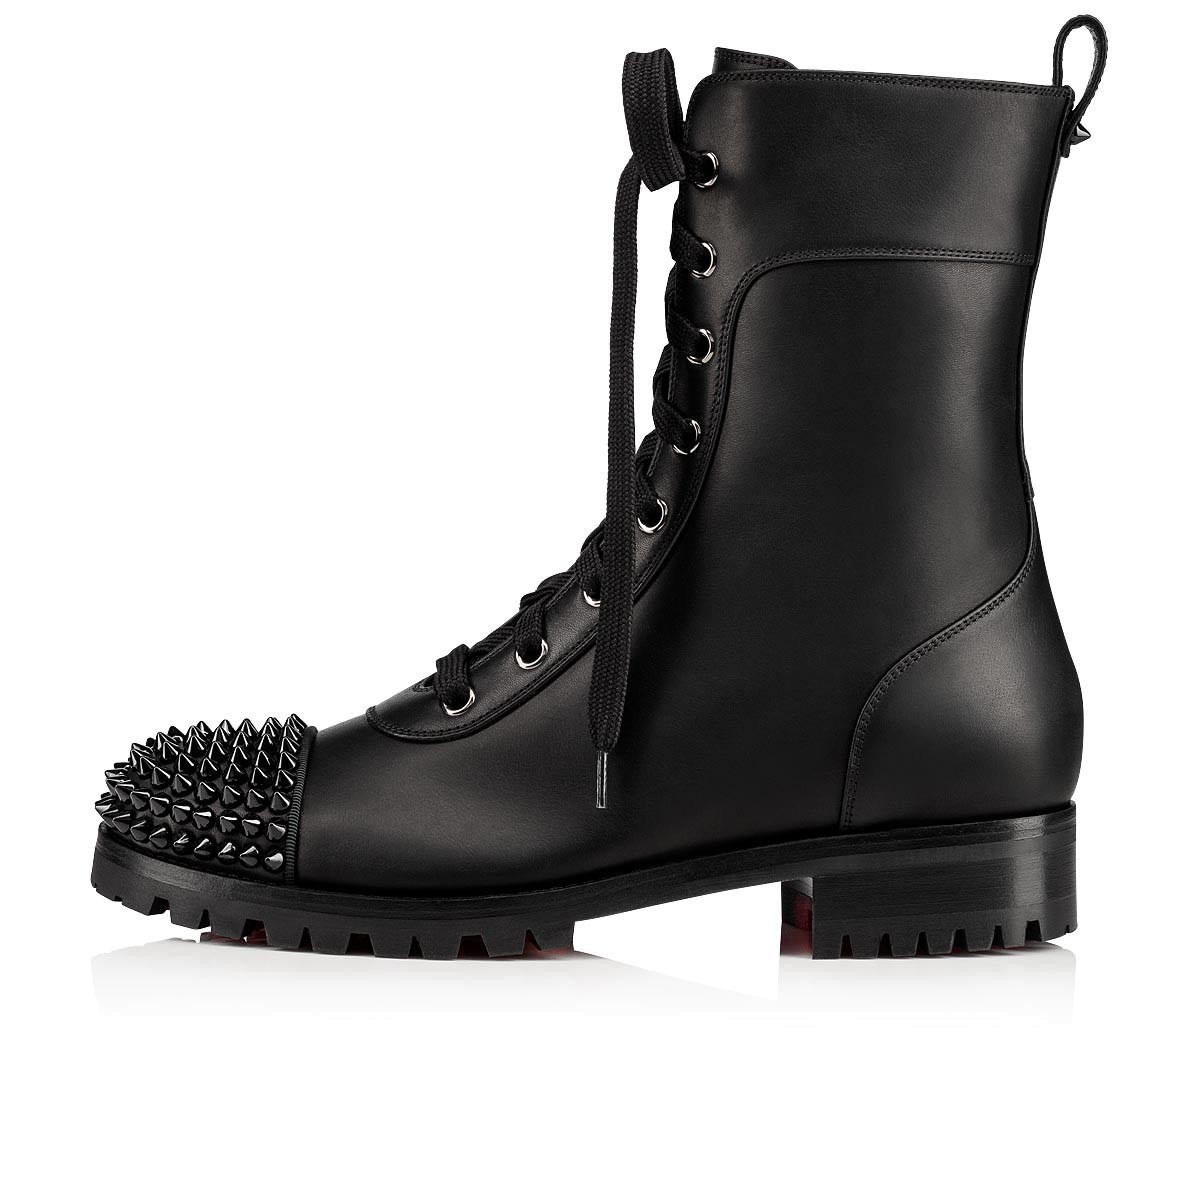 

Luxurys Designers Boots Ts Croc Spikes Blacks Genuine Leather Red Bottoms Ankles Boots Black Calf Leathers Ladies Ankle Boot Comba2304, Color 5